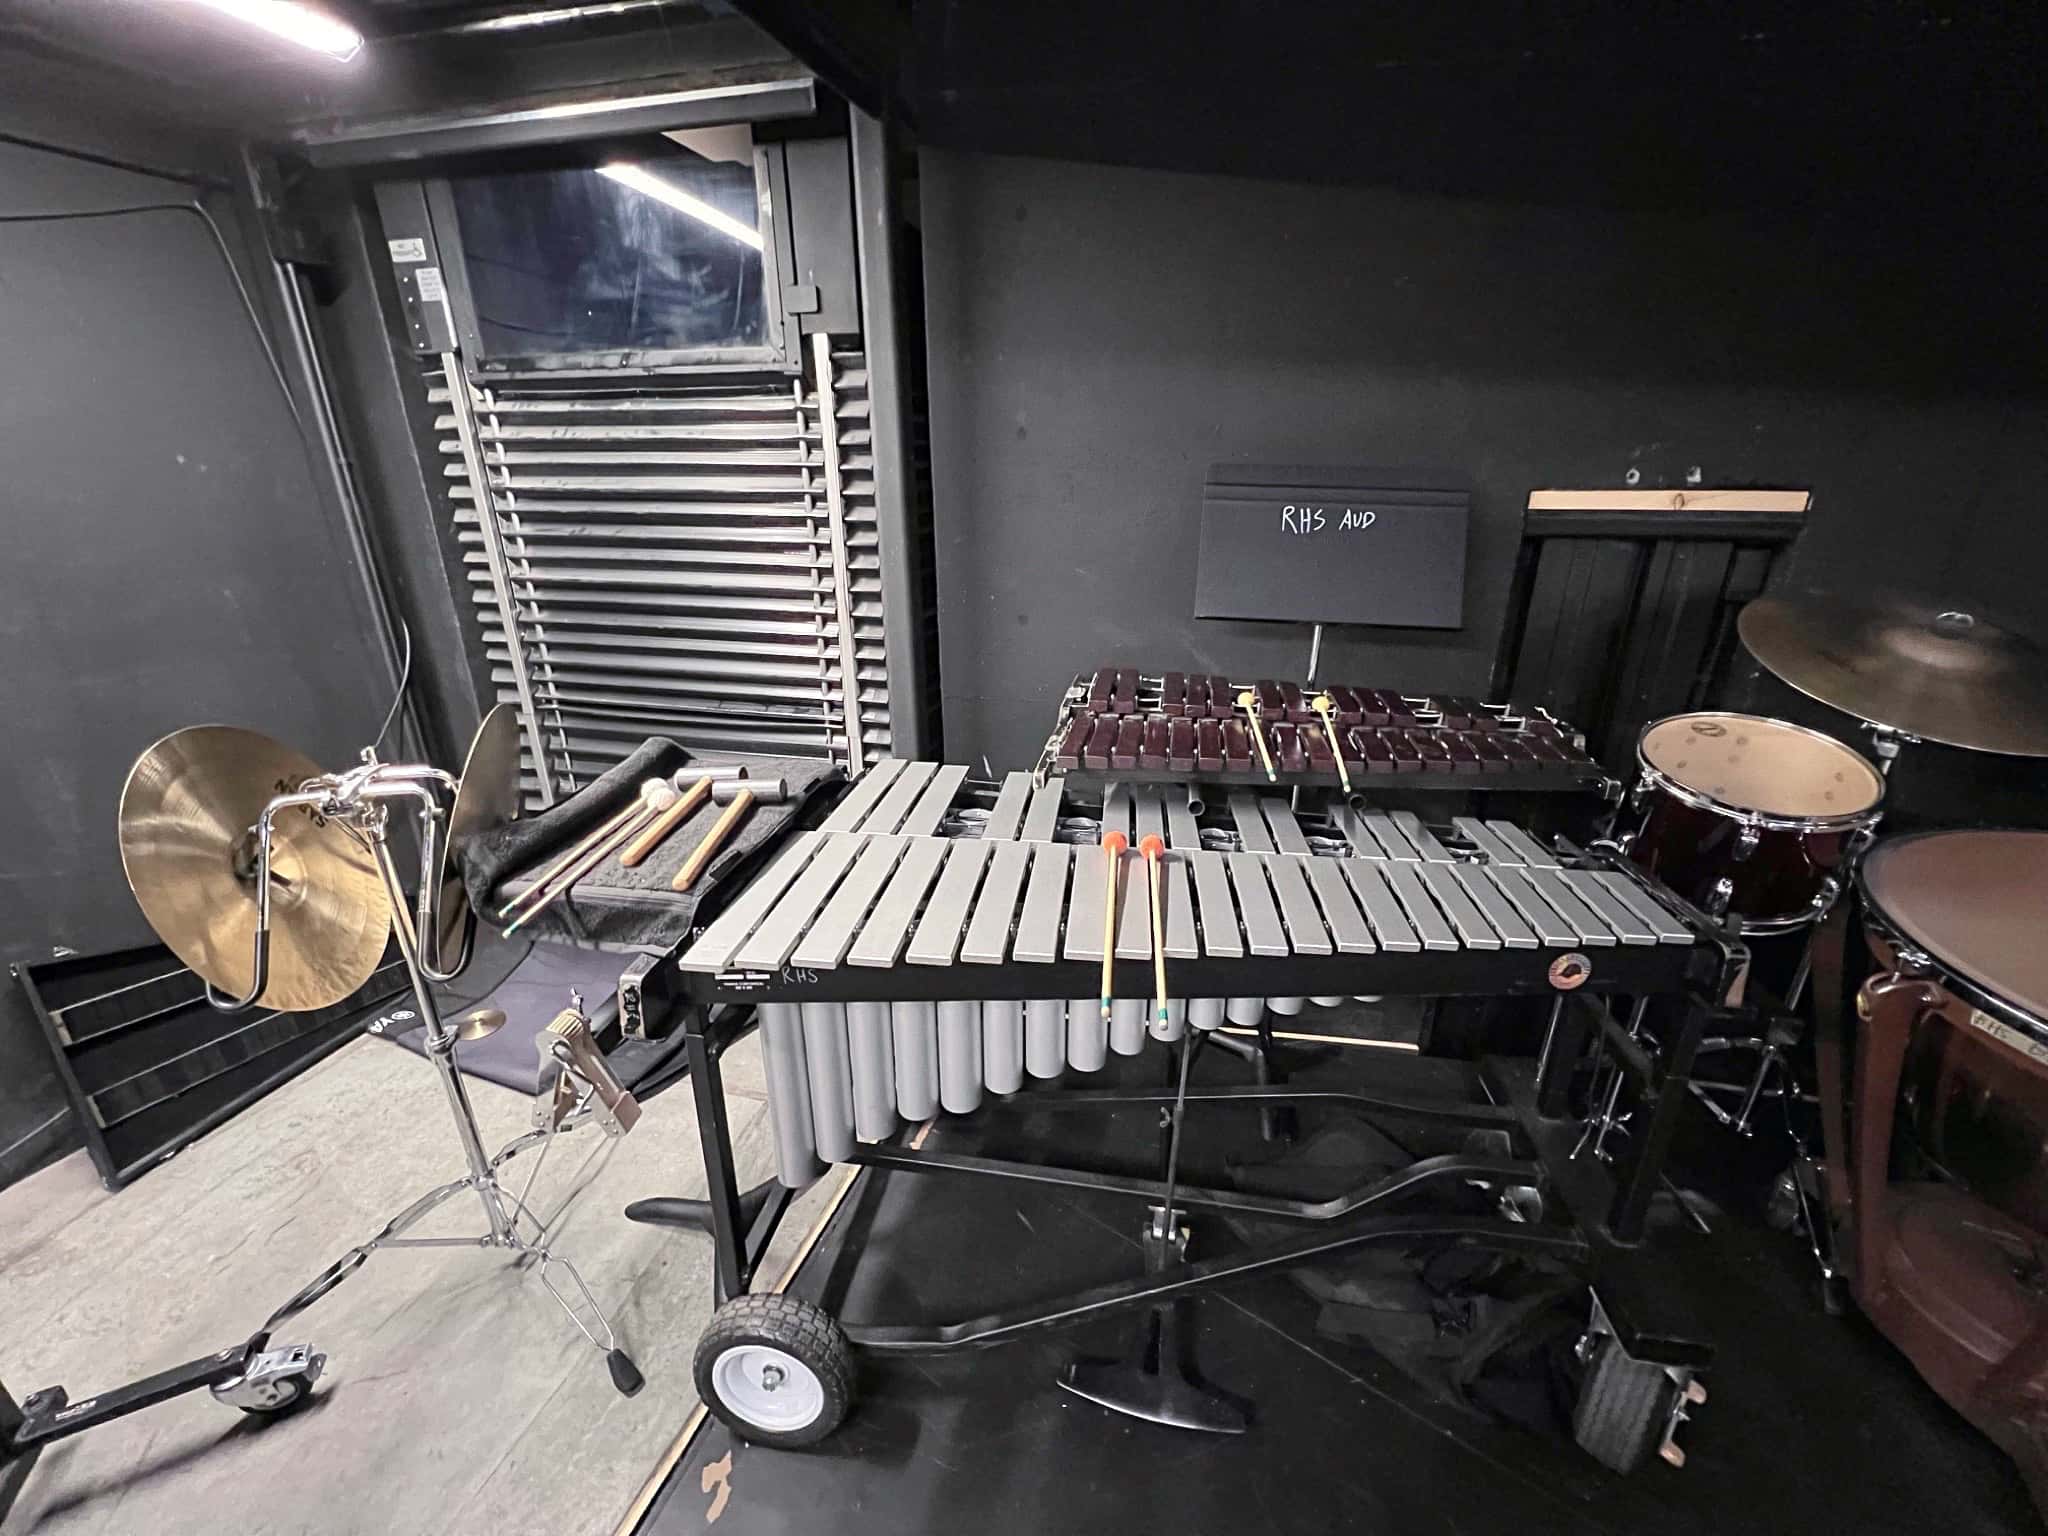 Quinton Perry and Henry Rice's setup for Sweeney Todd at Richland High School, in Richland, Washington.